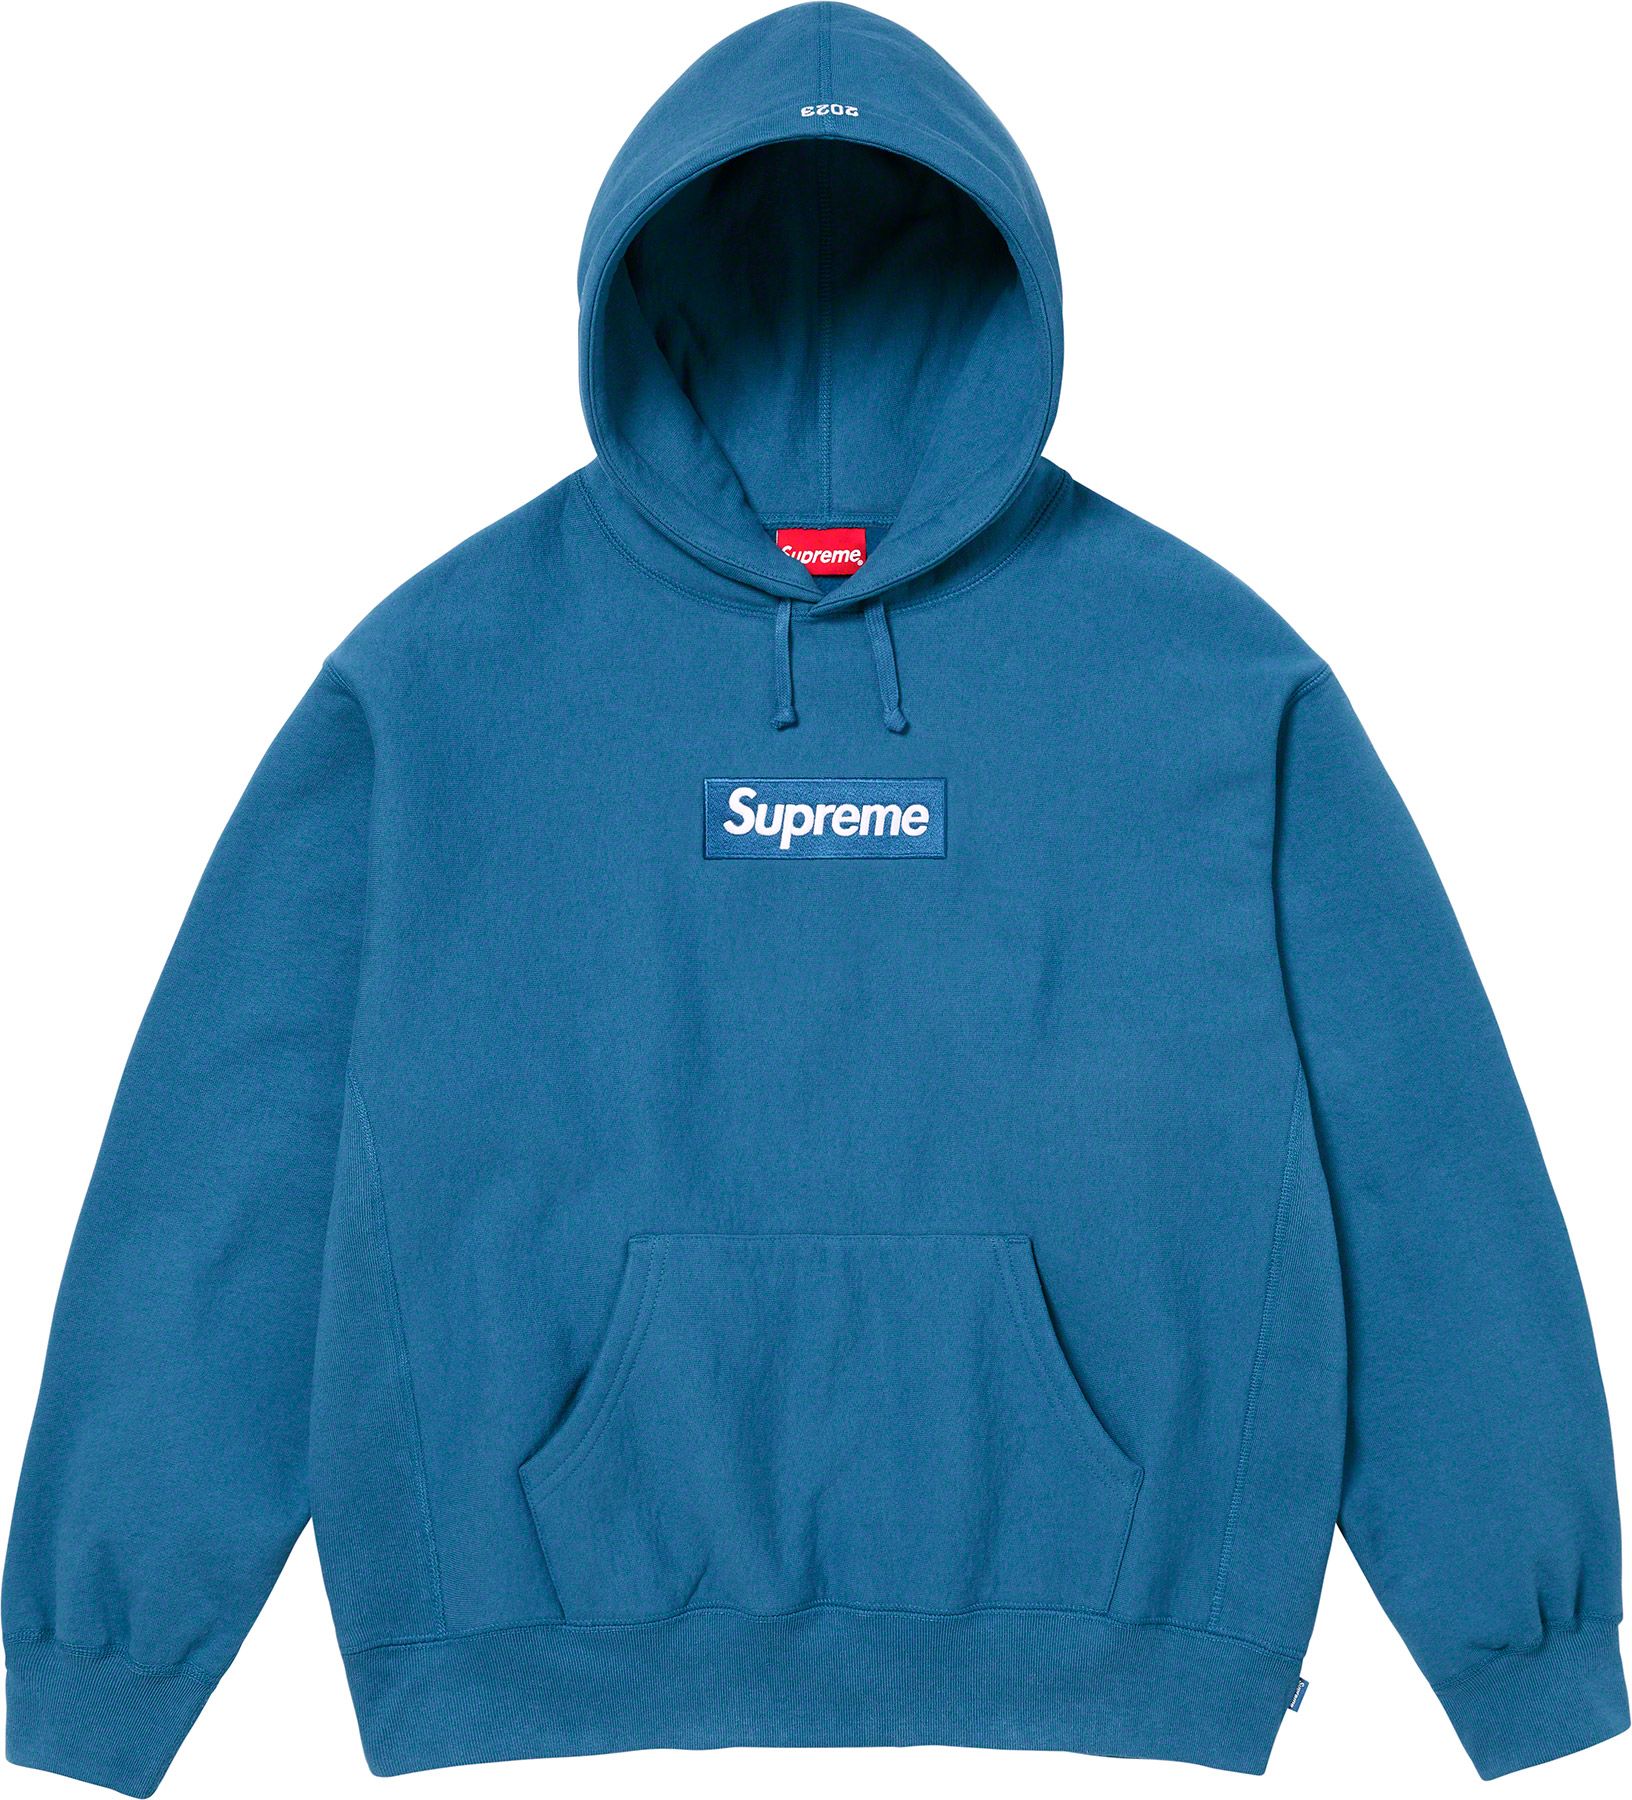 Supreme is dropping Box Logo hoodies and a Christmas ornament this